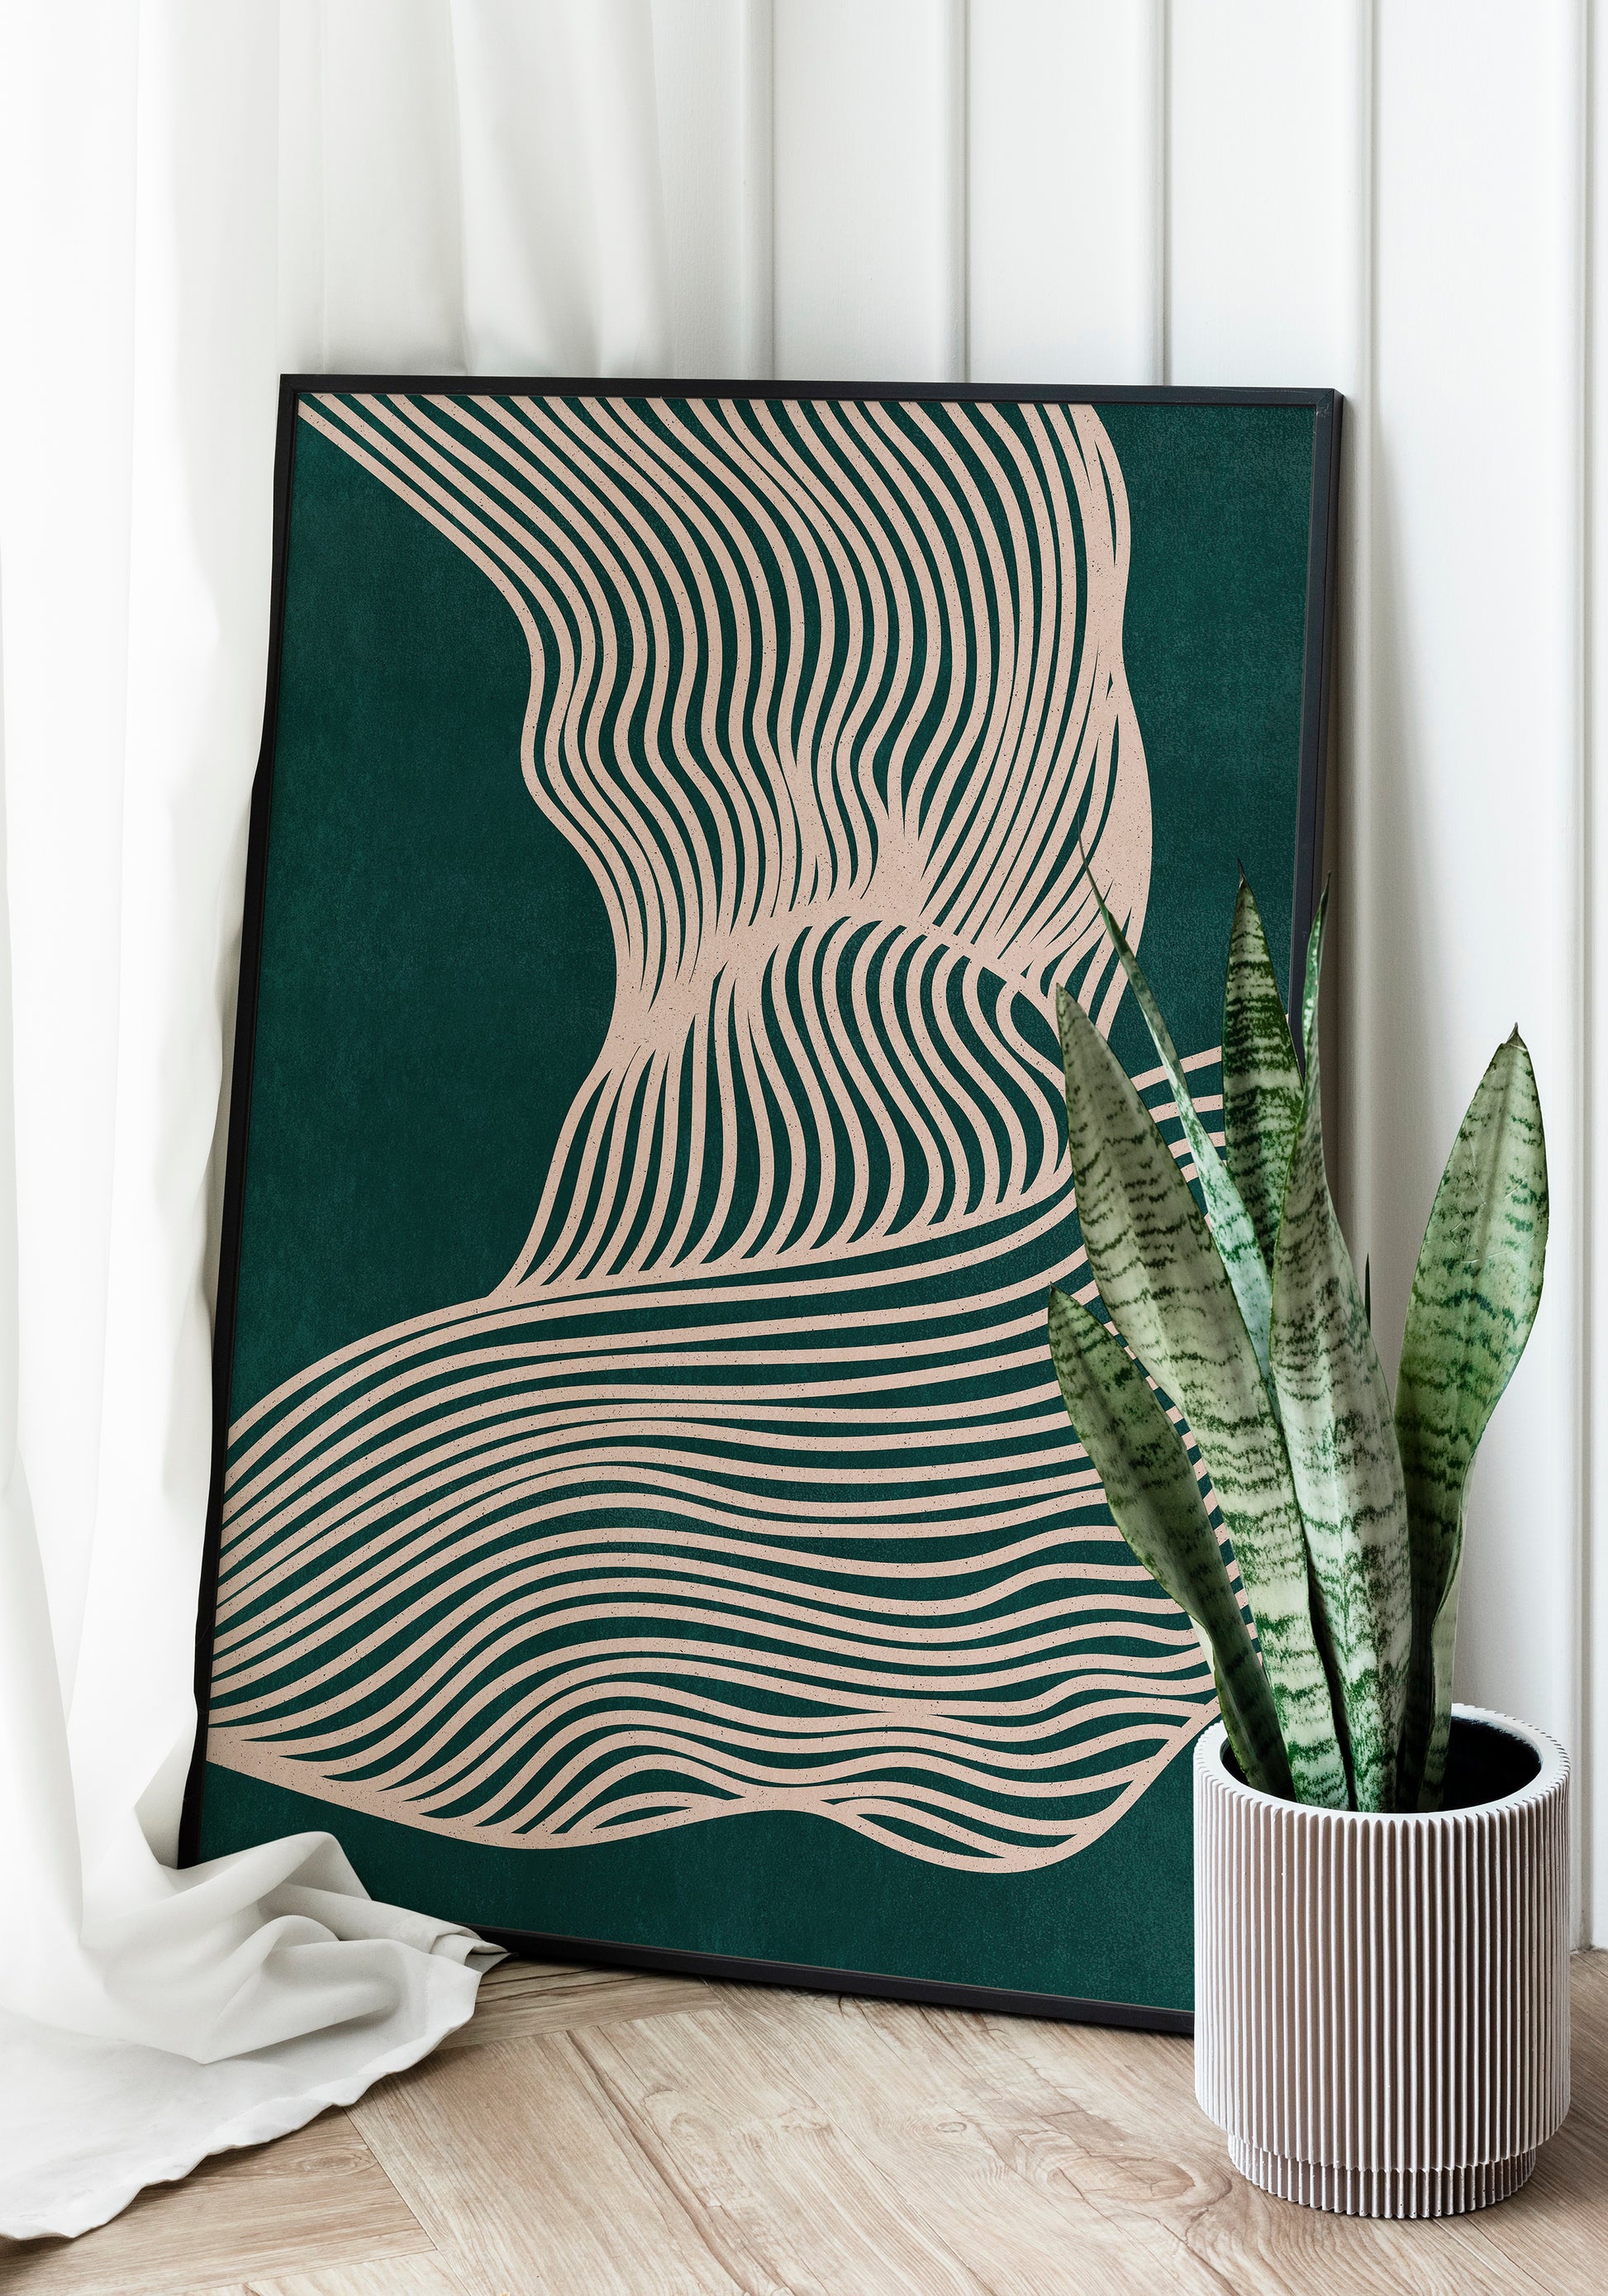 Extra large wall art	Printable wall art	Trendy emerald green	Beige abstract line	Art poster	Bedroom wall decor	Living room wall art	INSTANT DOWNLOAD	Neutral boho art	Modern decoration	Minimalist poster	Geometric abstract	Abstract lines